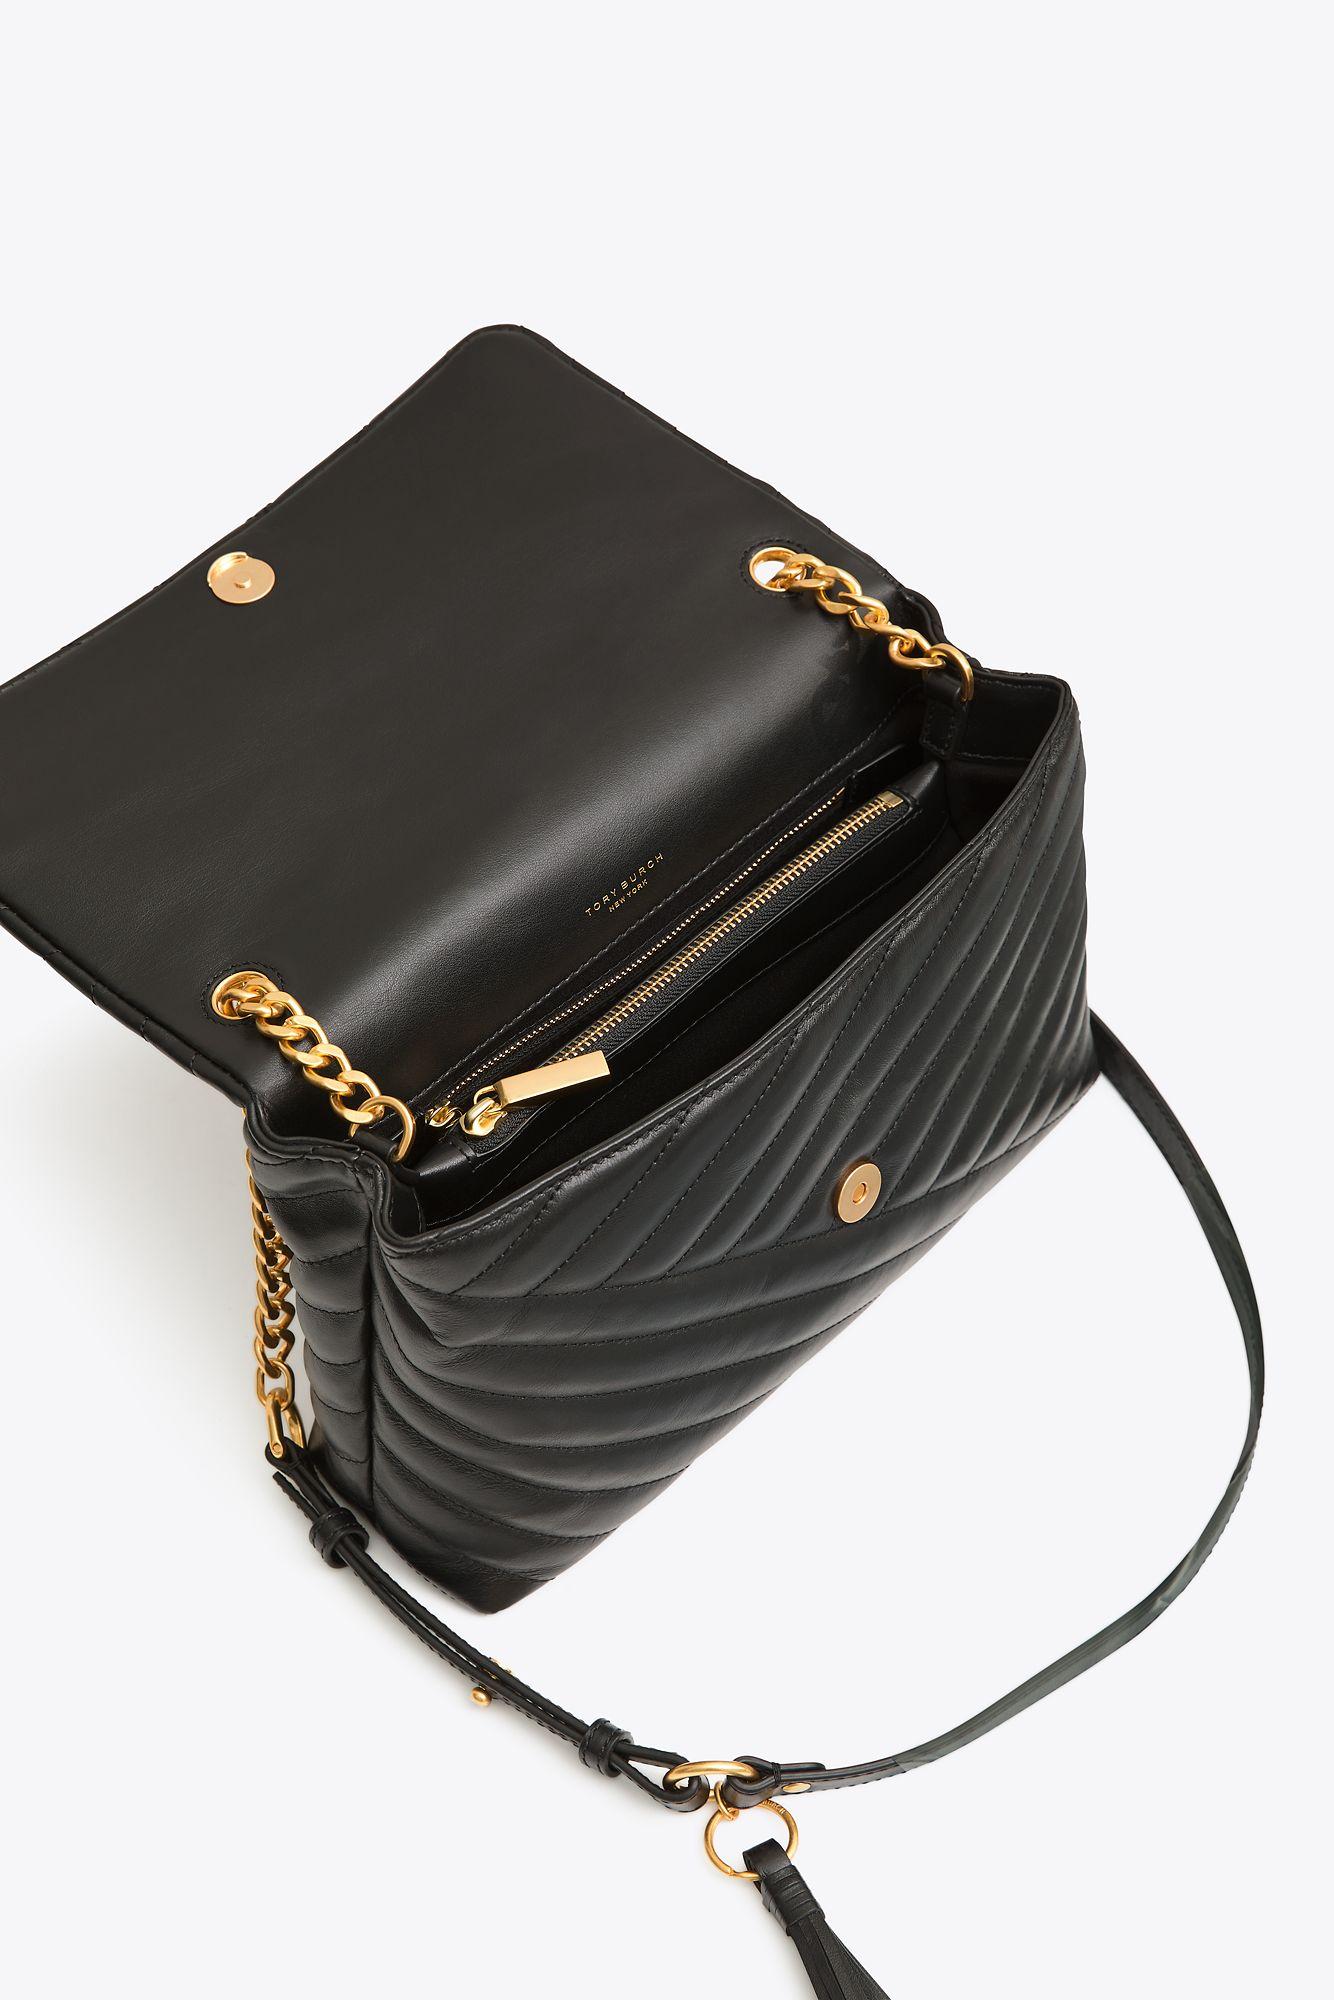 Tory Burch Kira Quilted Leather Shoulder Bag in Black - Lyst